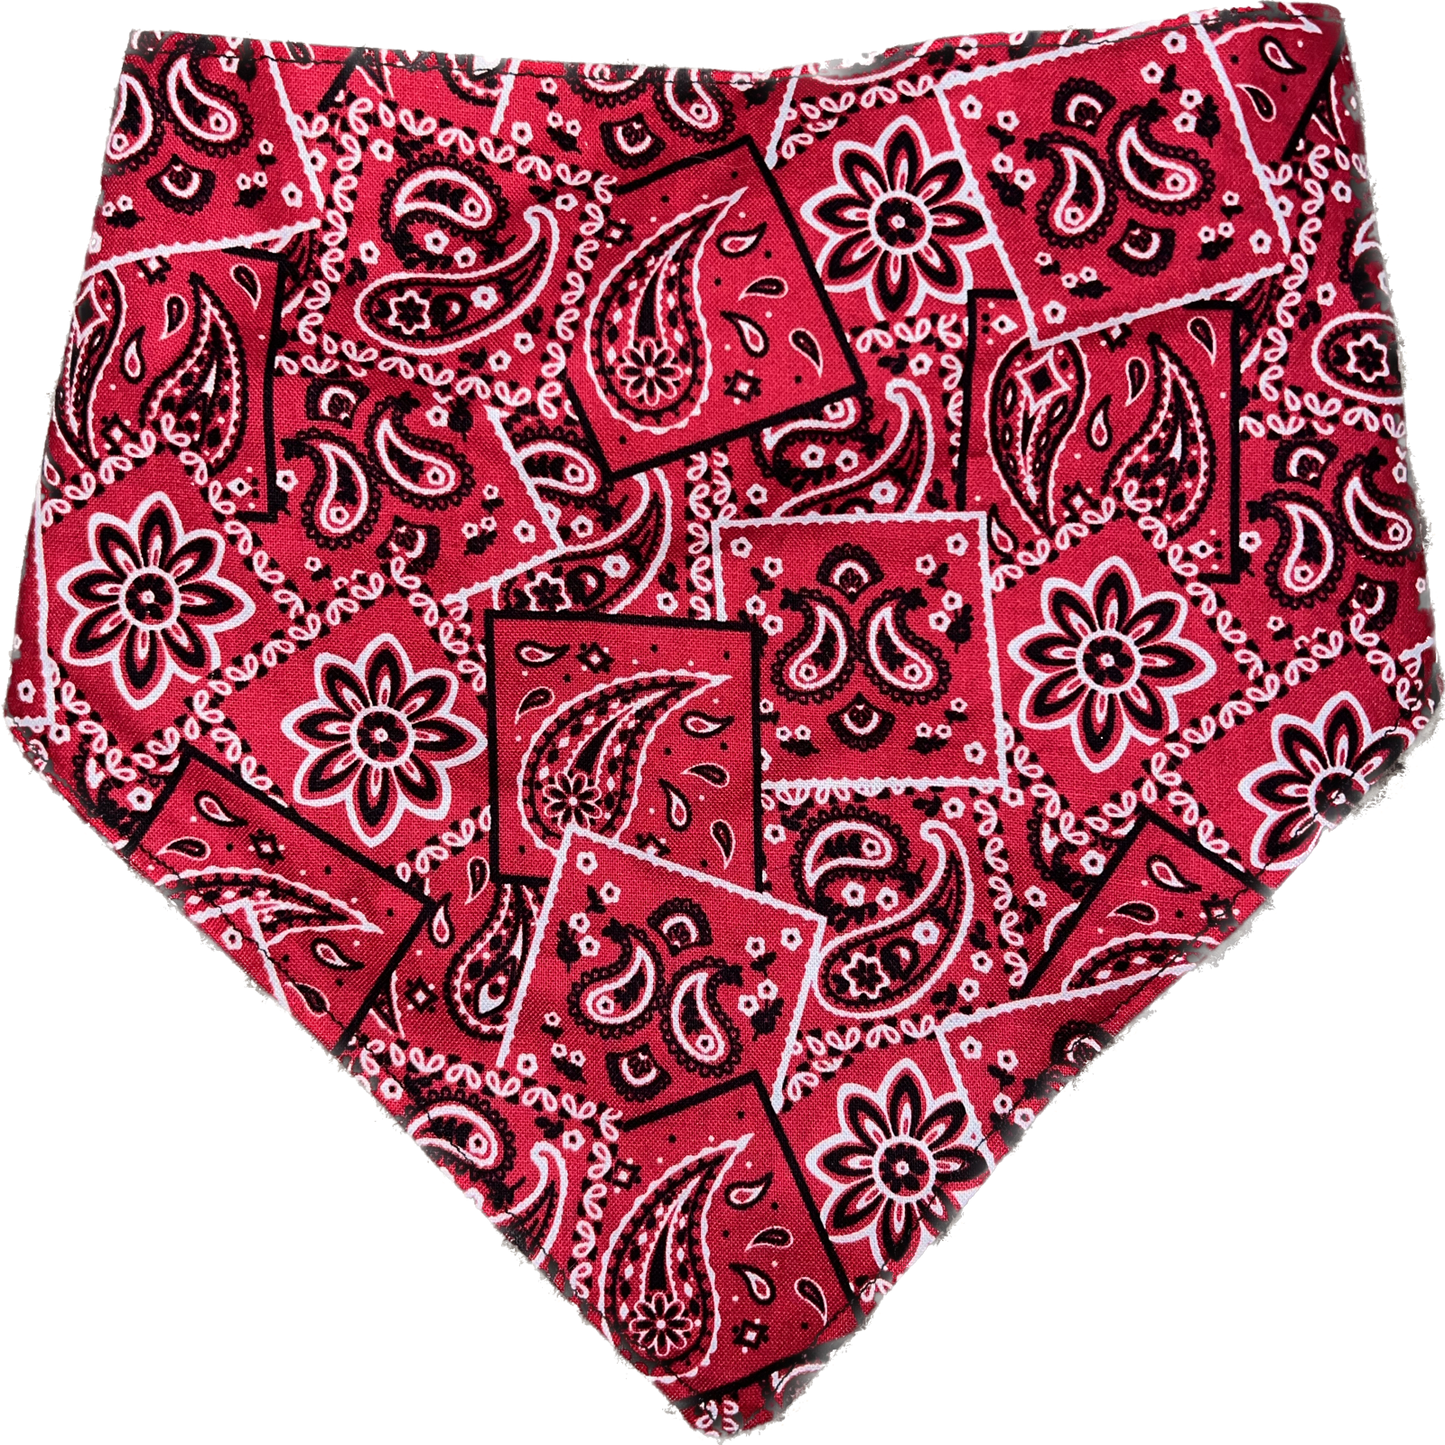 Tied Together Red Bandana Bandanchie